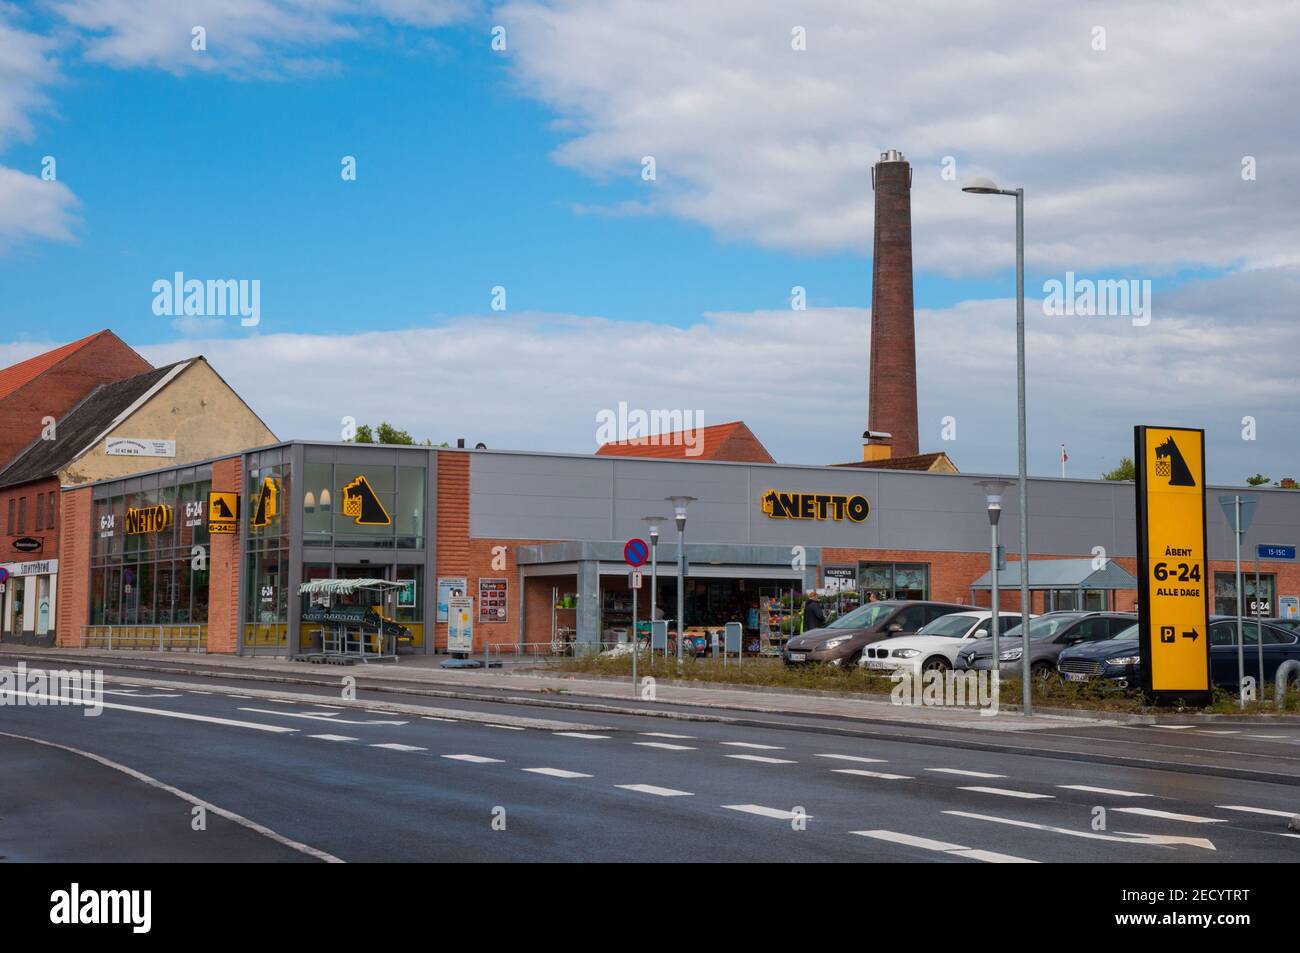 Page 2 - Ringsted High Resolution Stock Photography and Images - Alamy